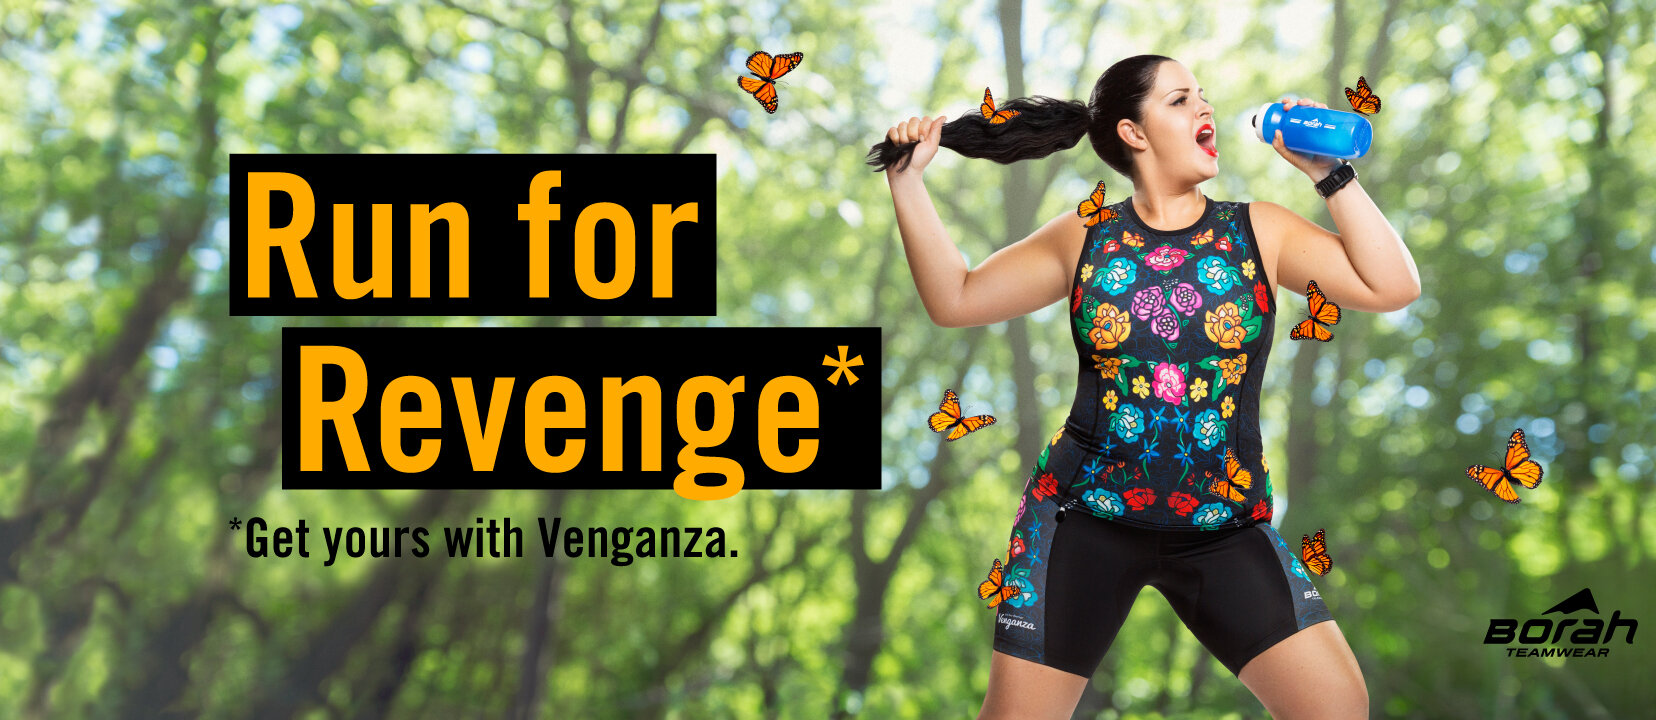 Creative product photography: female athlete surrounded by butterflies wearing floral triathlon kit by Venganza sings into her water bottle on her run through the woods.